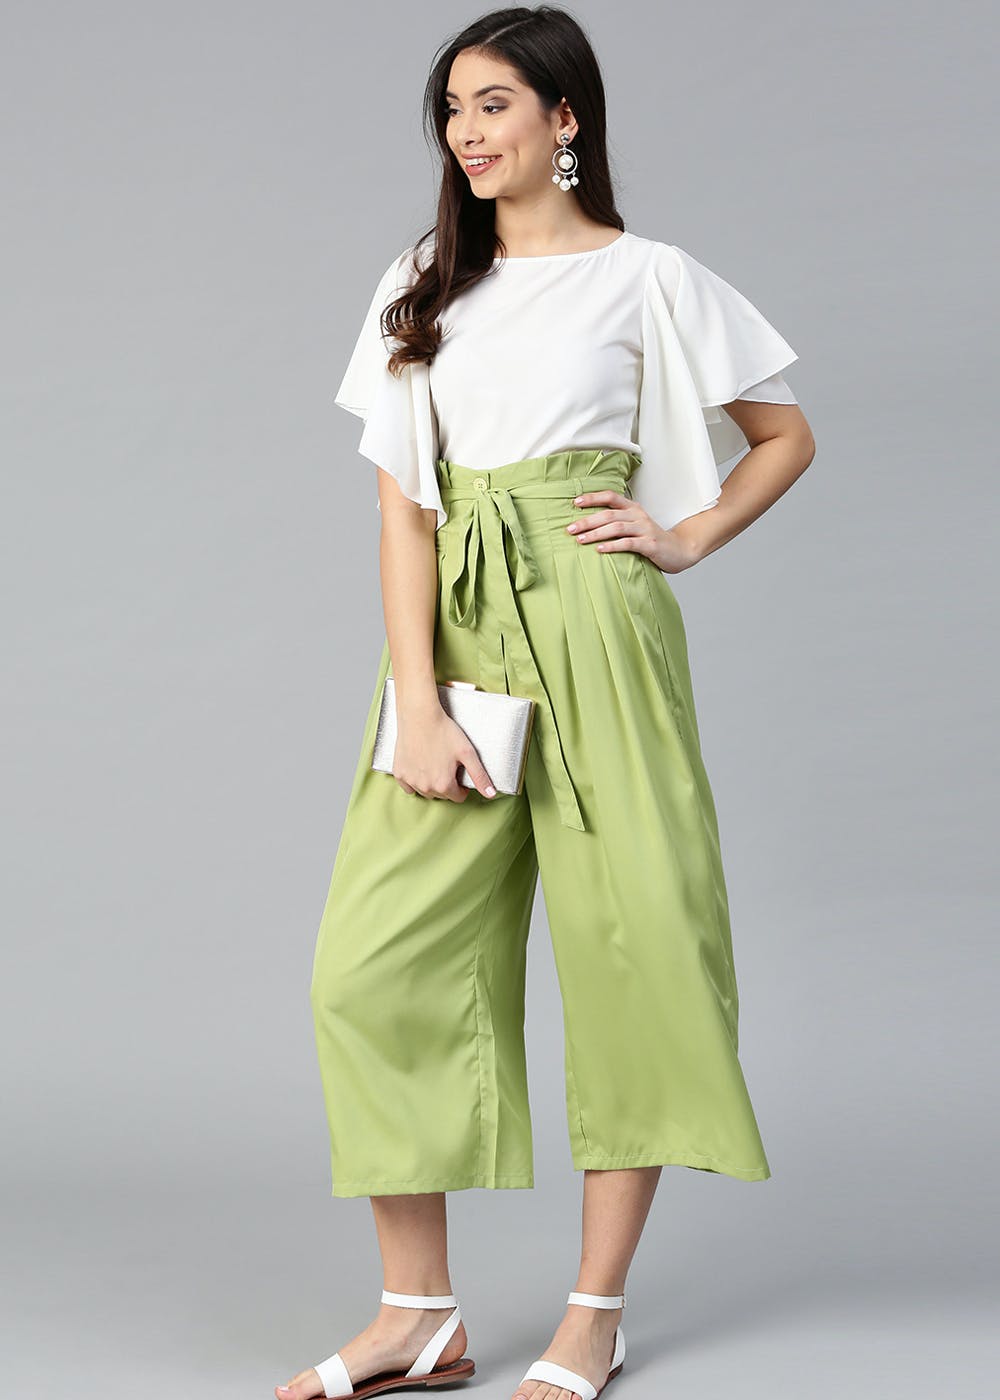 Get Off White Flared Ruffle Top & Trouser Set at ₹ 1049